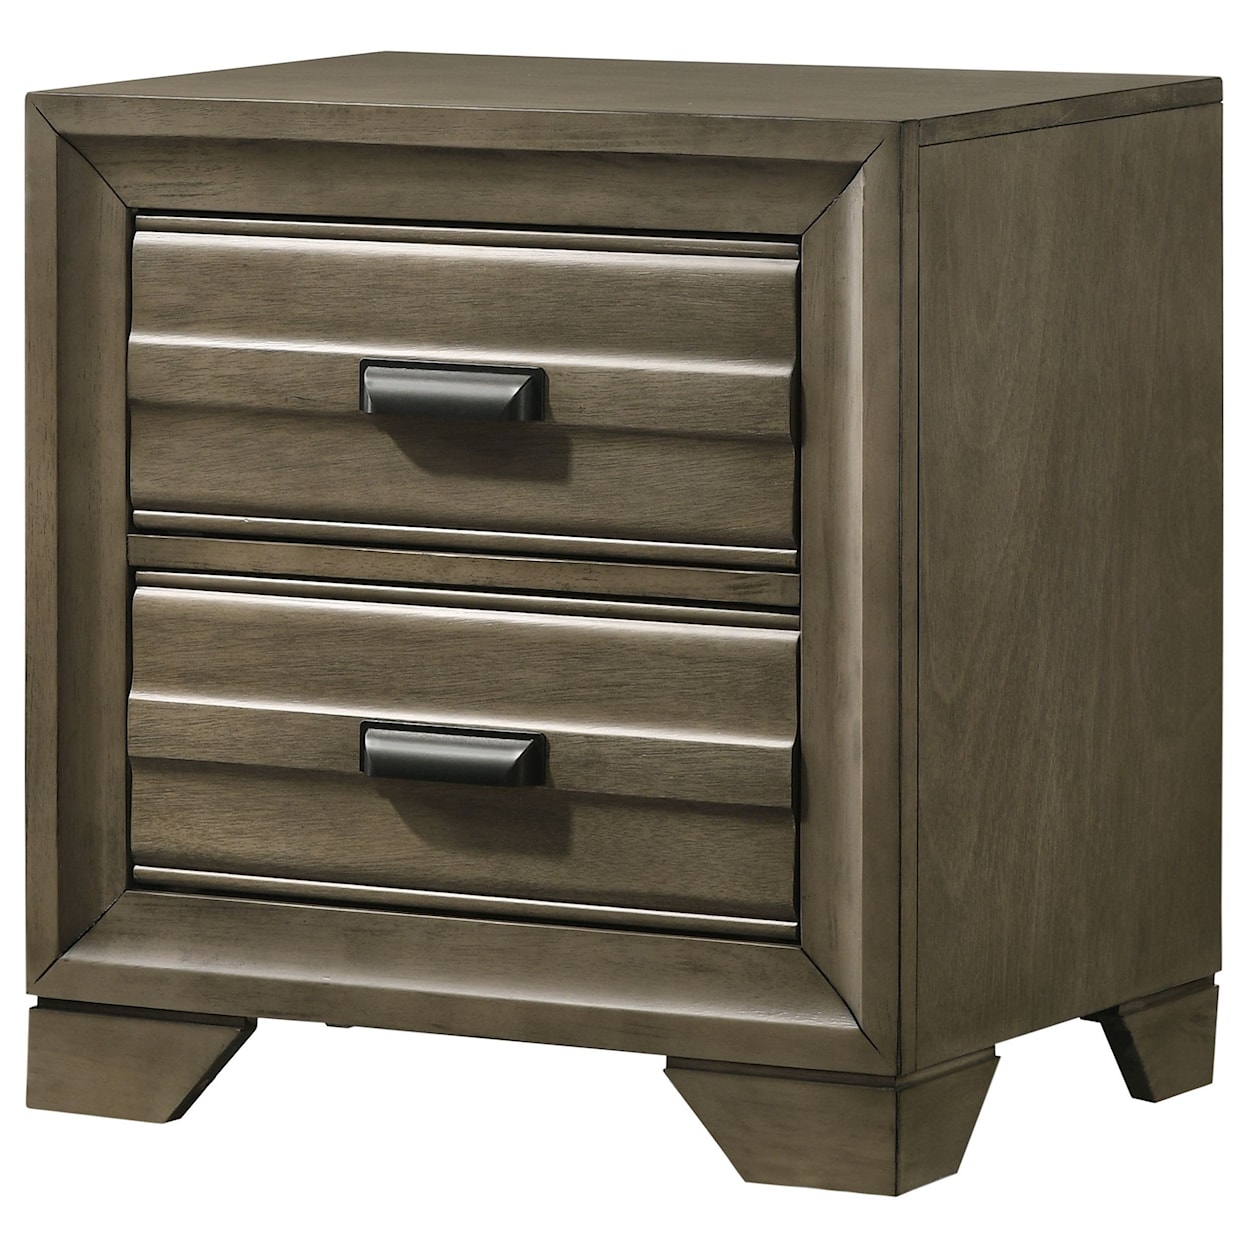 Lifestyle 5236A 2 Drawer Nightstand